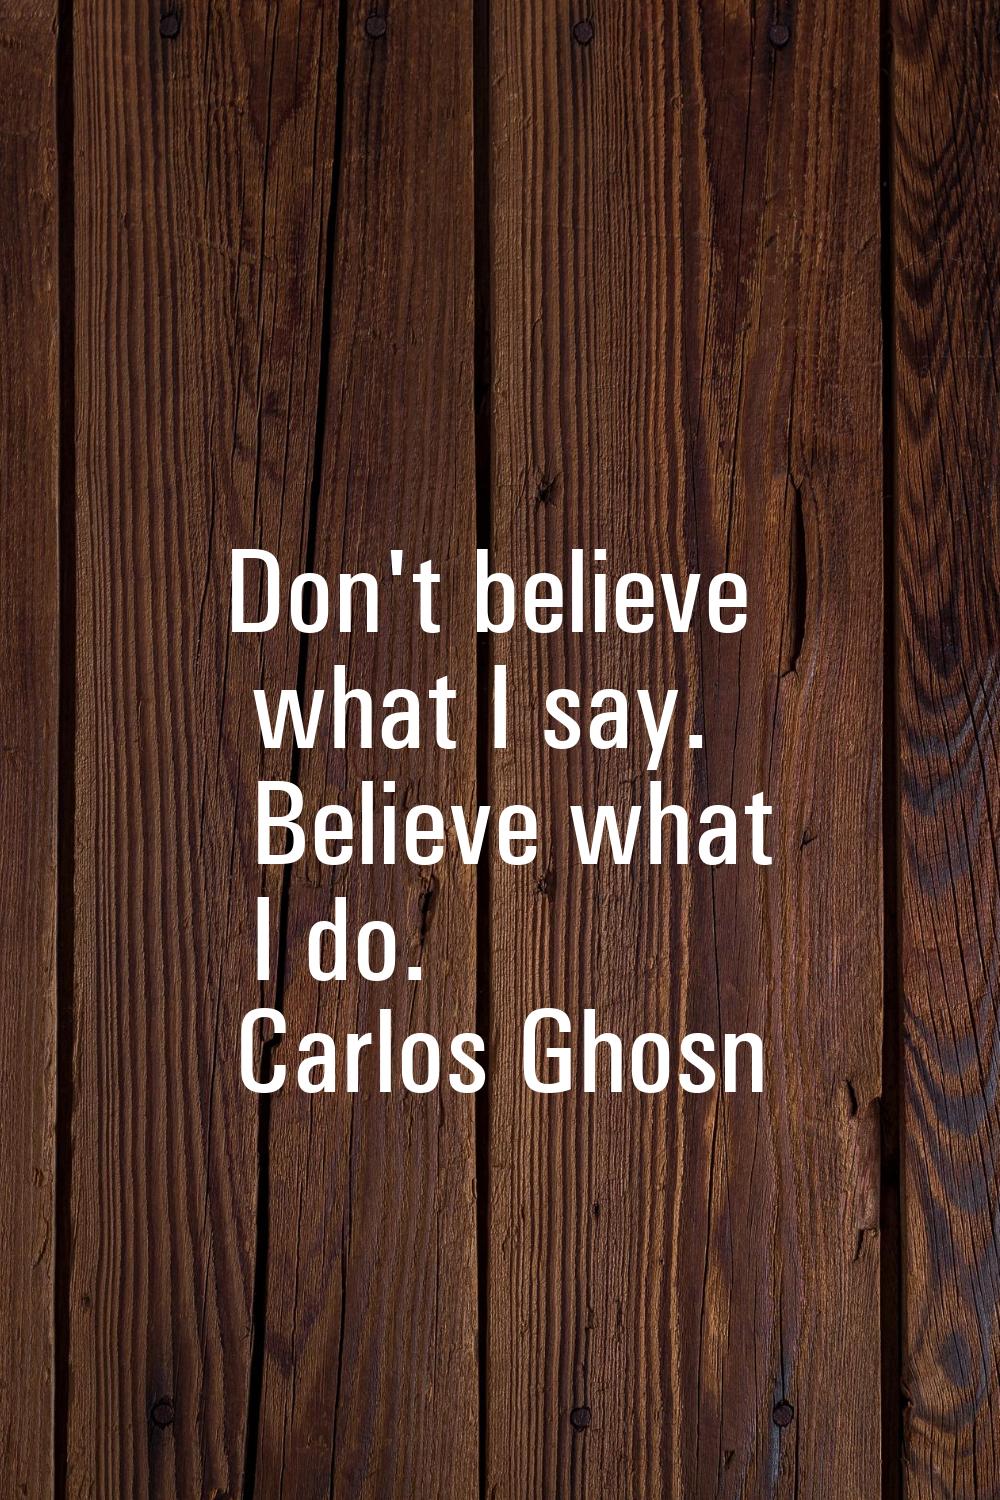 Don't believe what I say. Believe what I do.